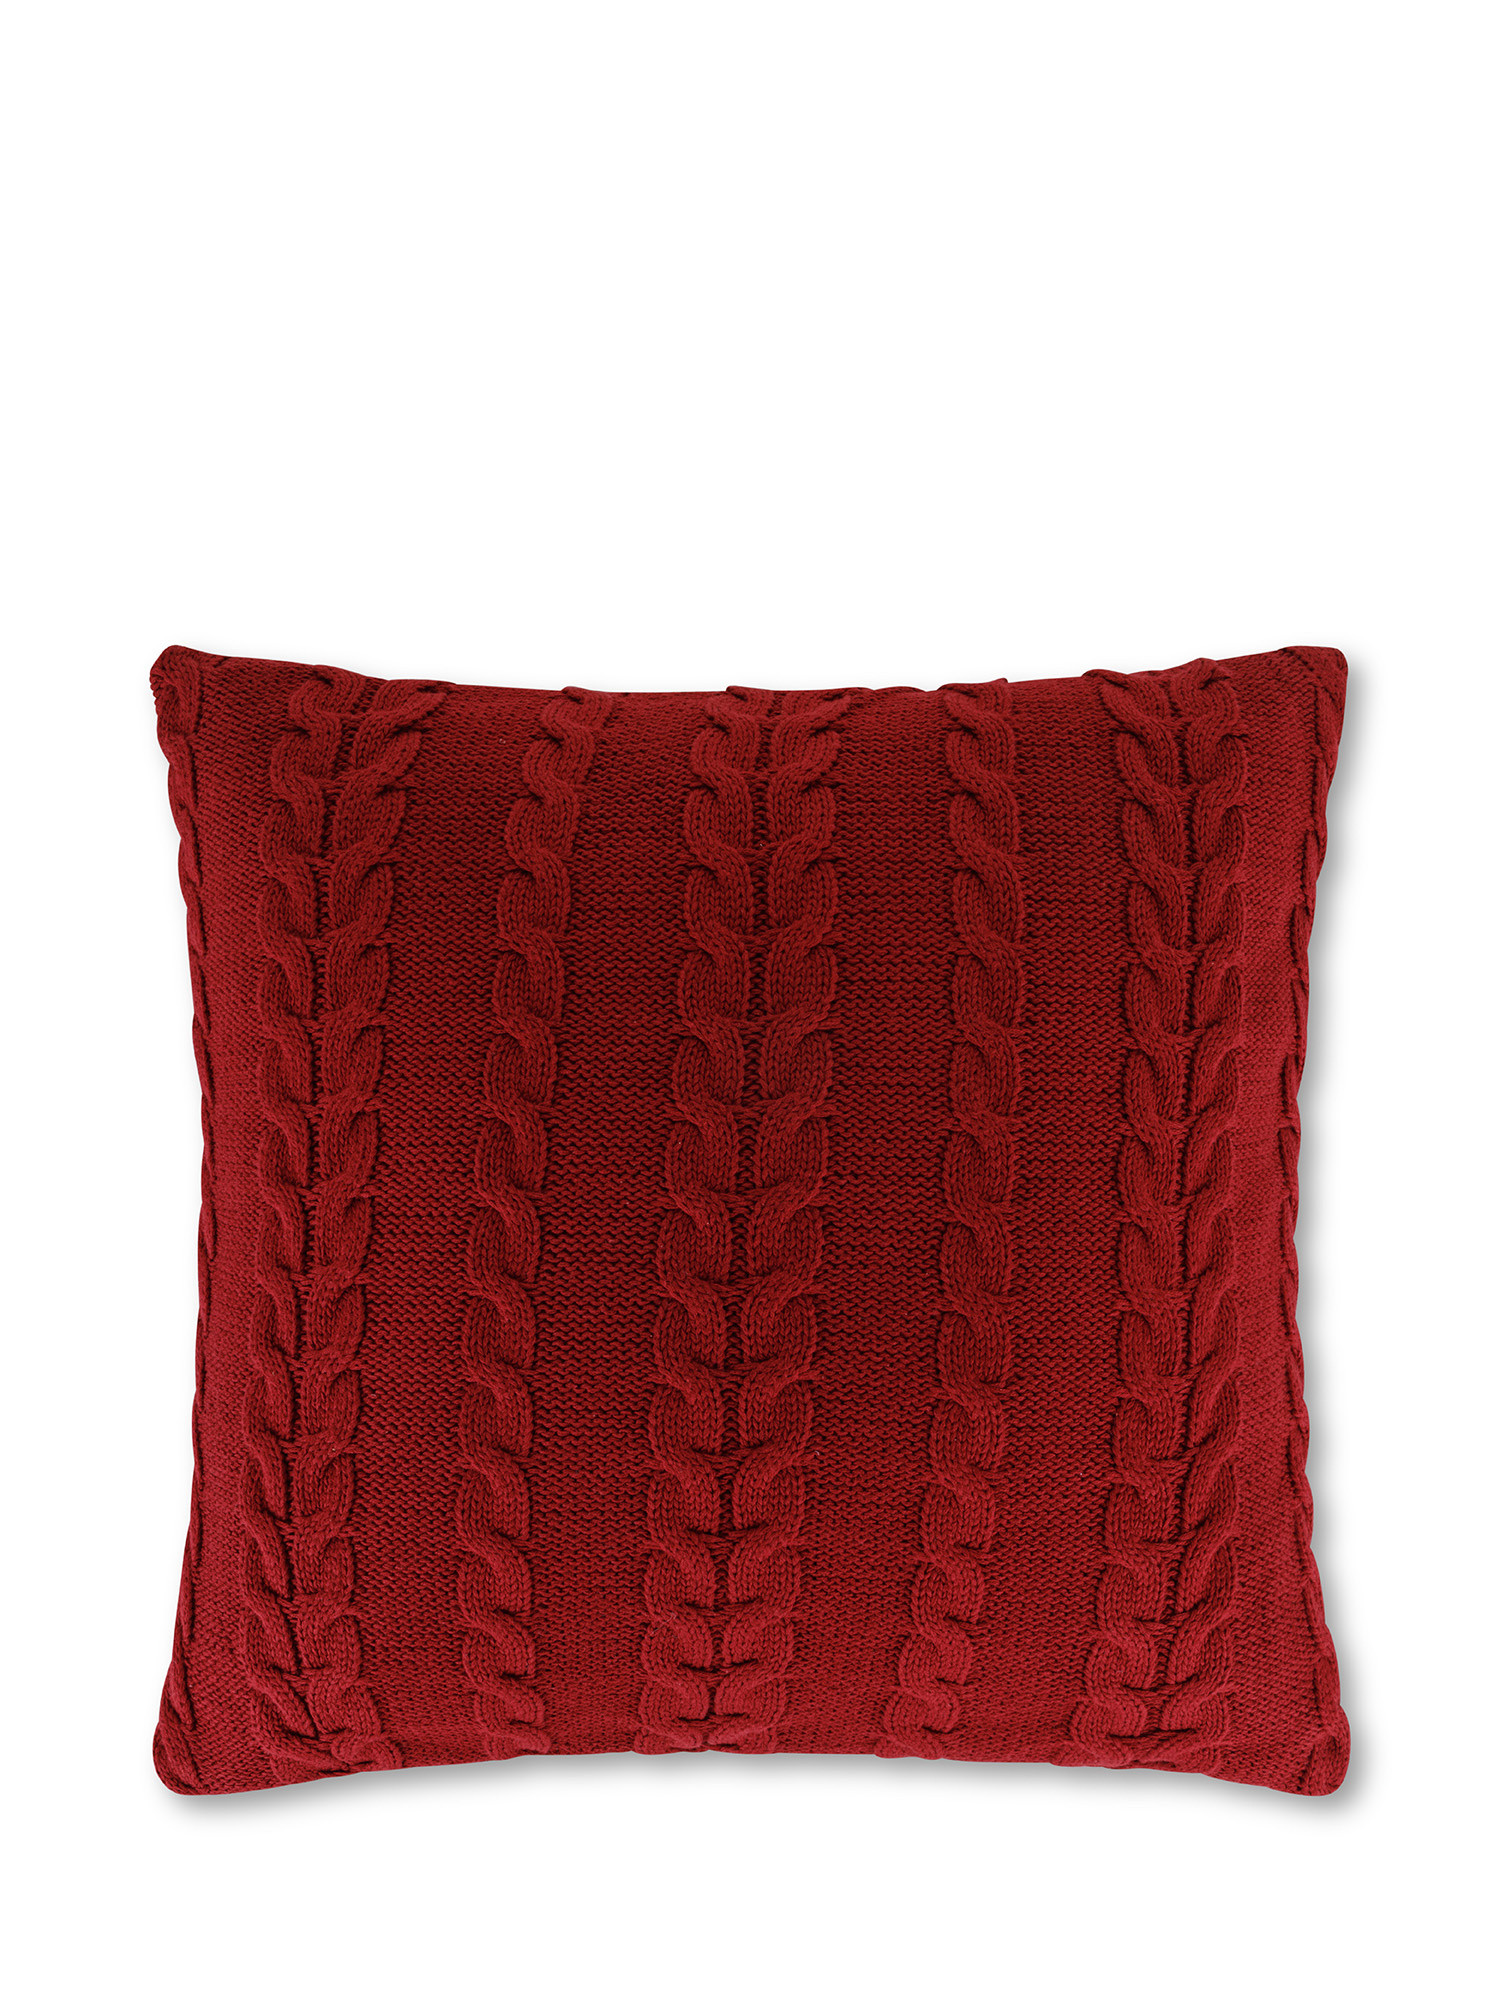 Knitted cushion with braid motif 45x45 cm, Red, large image number 0